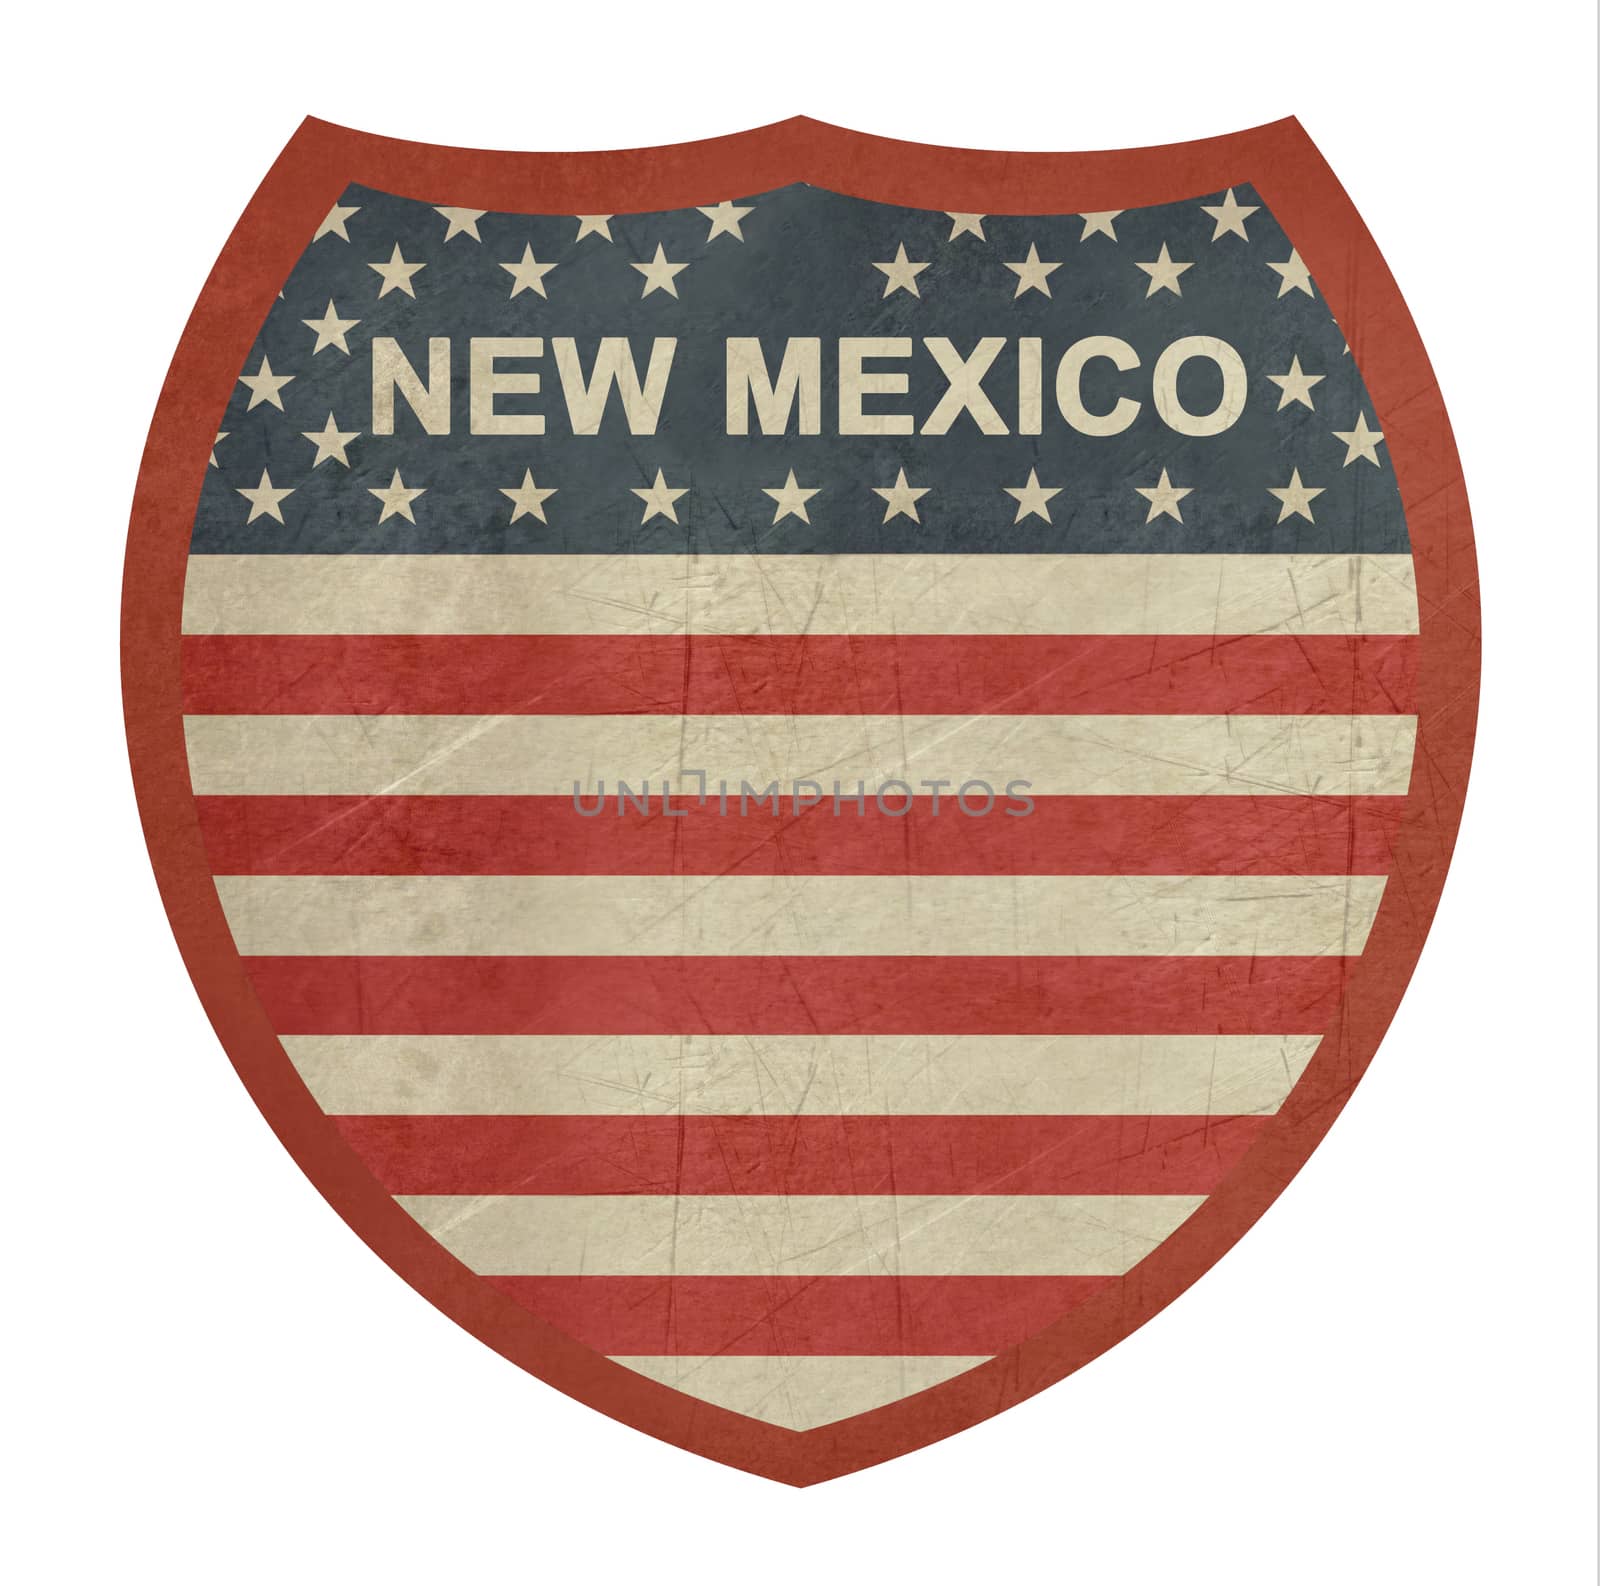 Grunge New Mexico American interstate highway sign isolated on a white background.